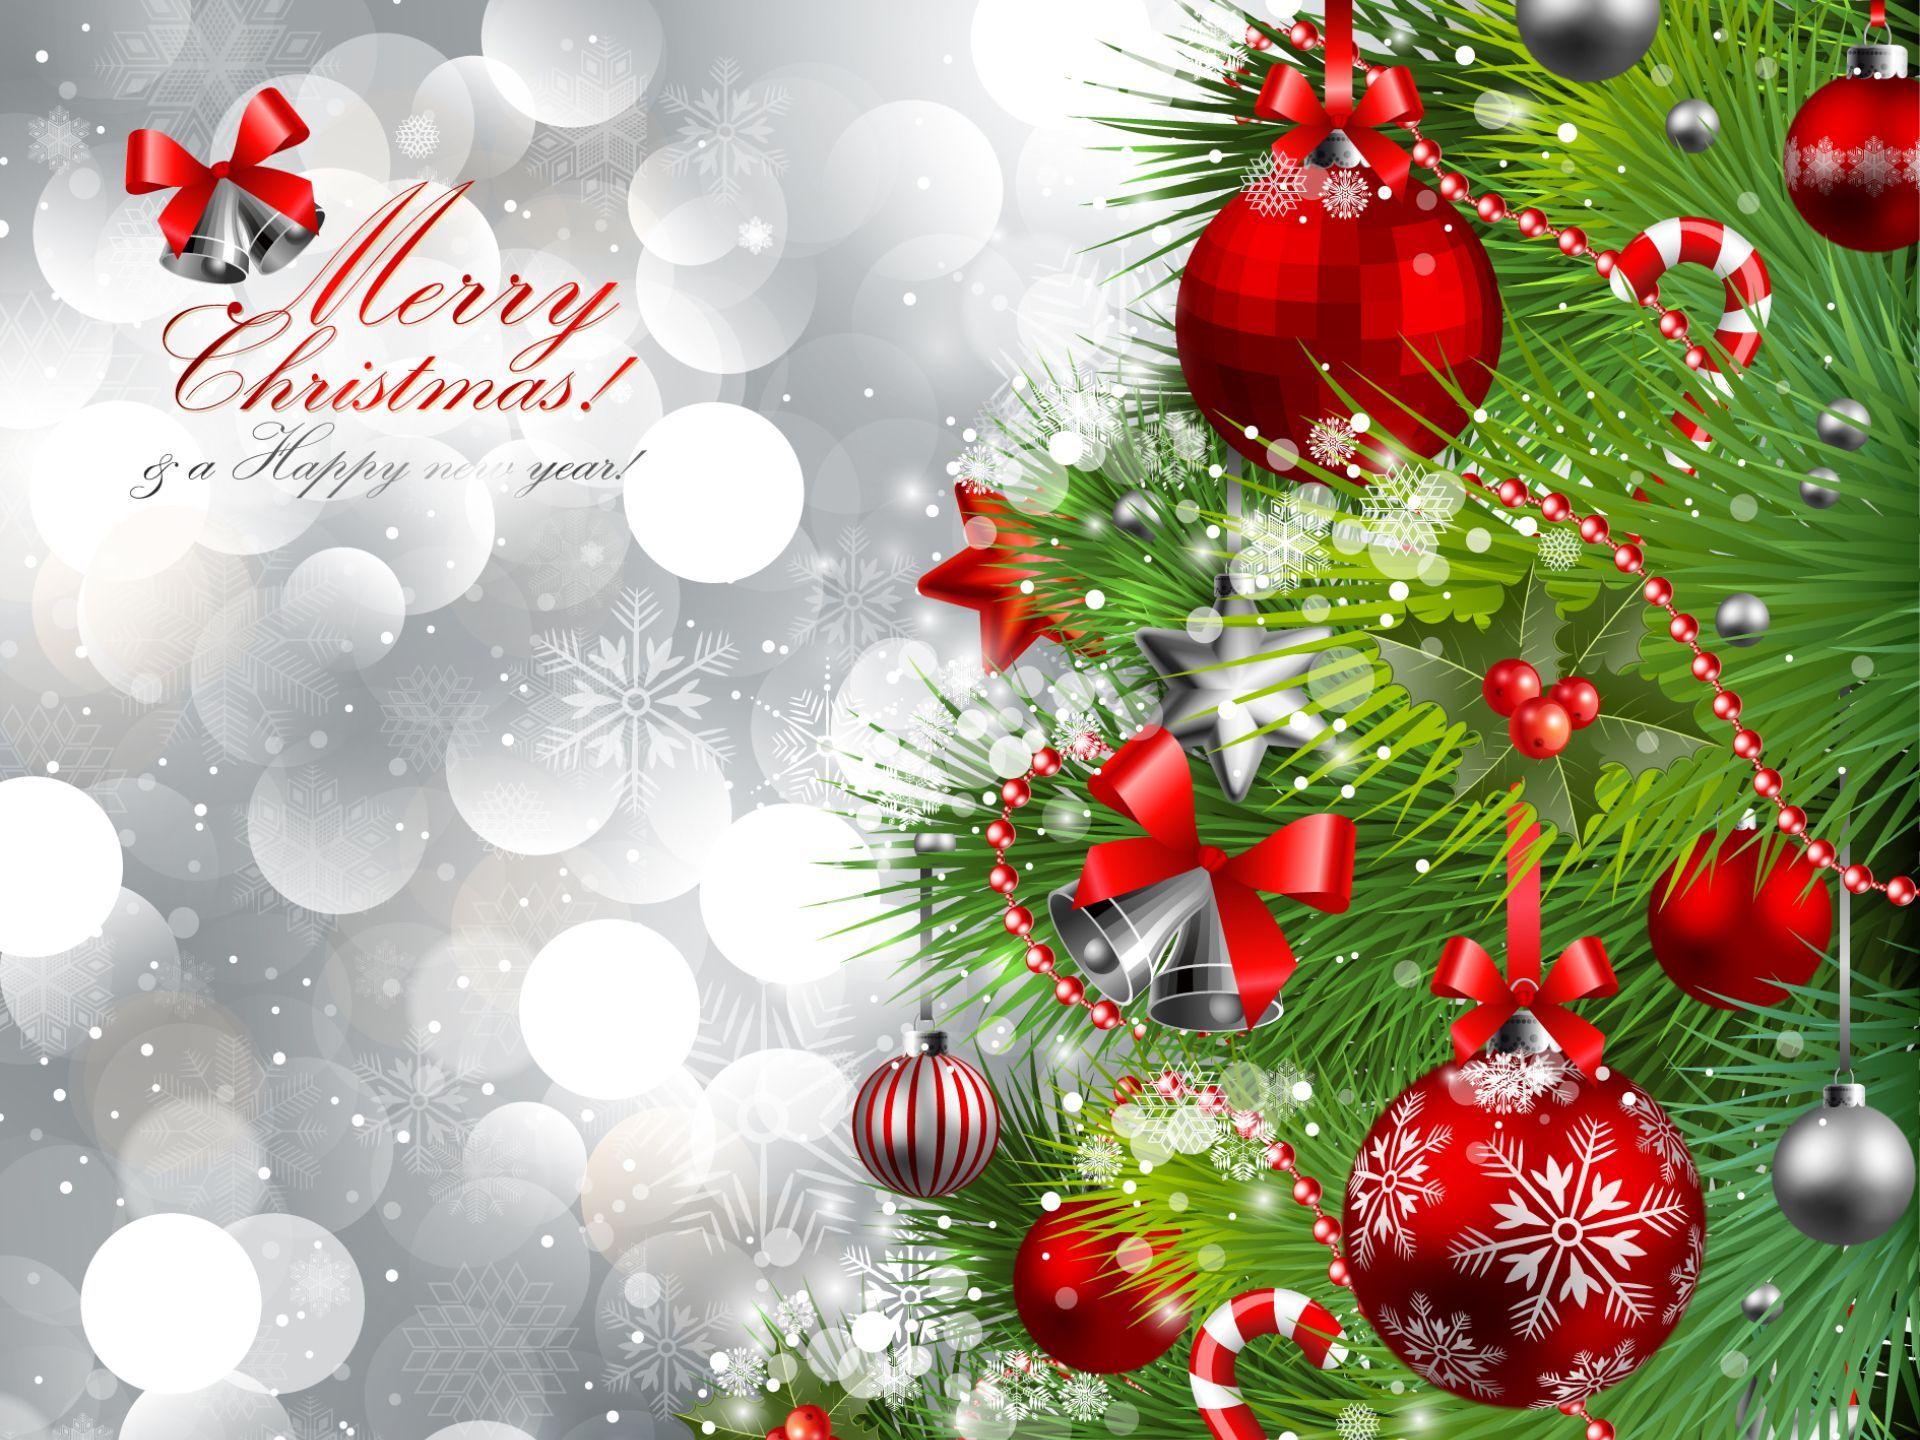 Happy Christmas Wallpapers - Top Free Happy Christmas Backgrounds